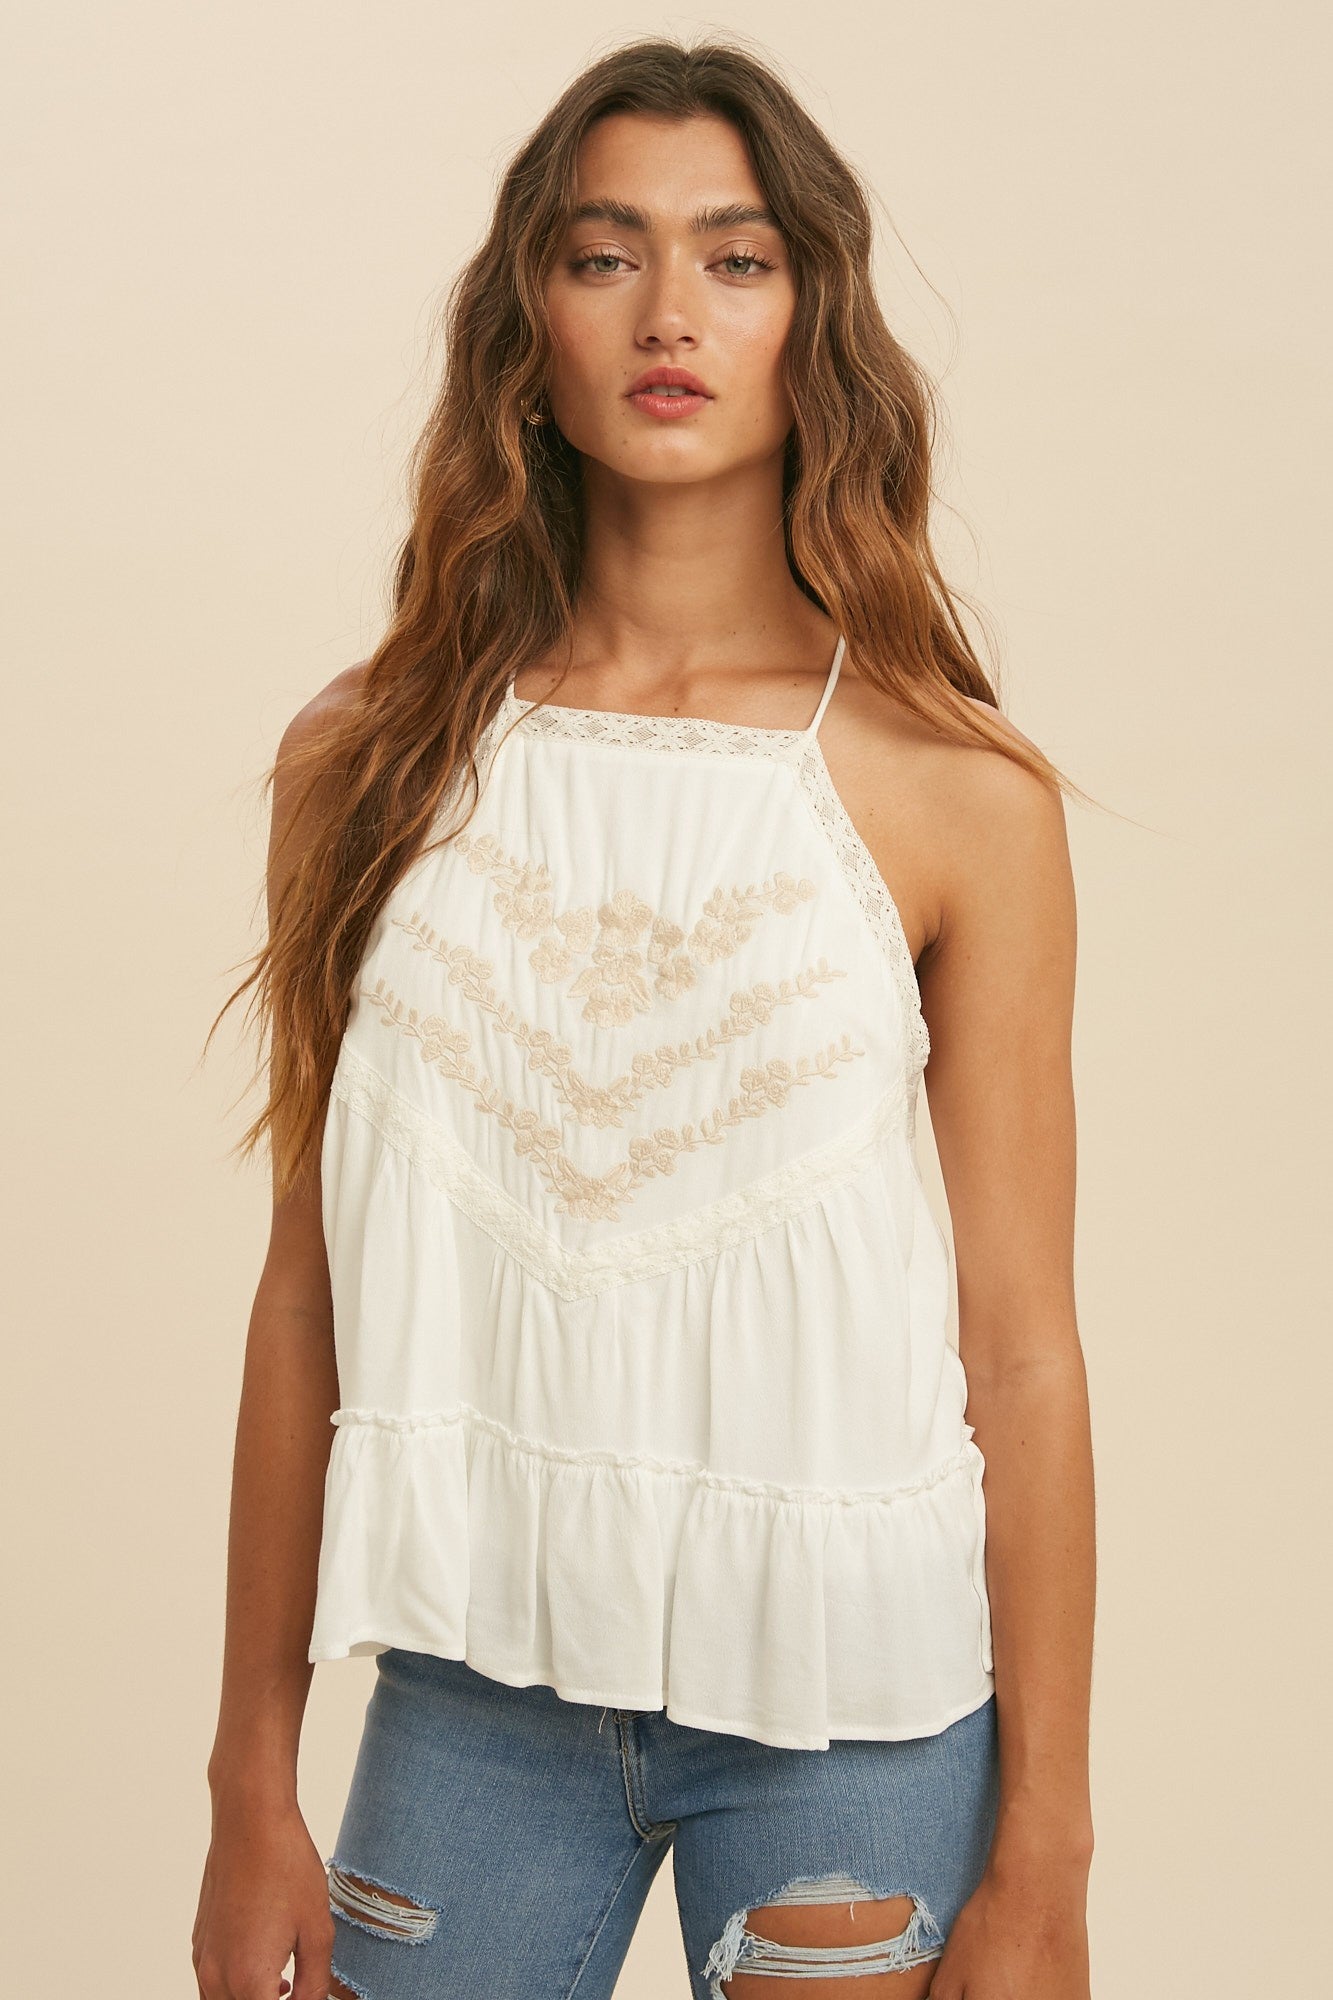 The Camille Embroidered Top